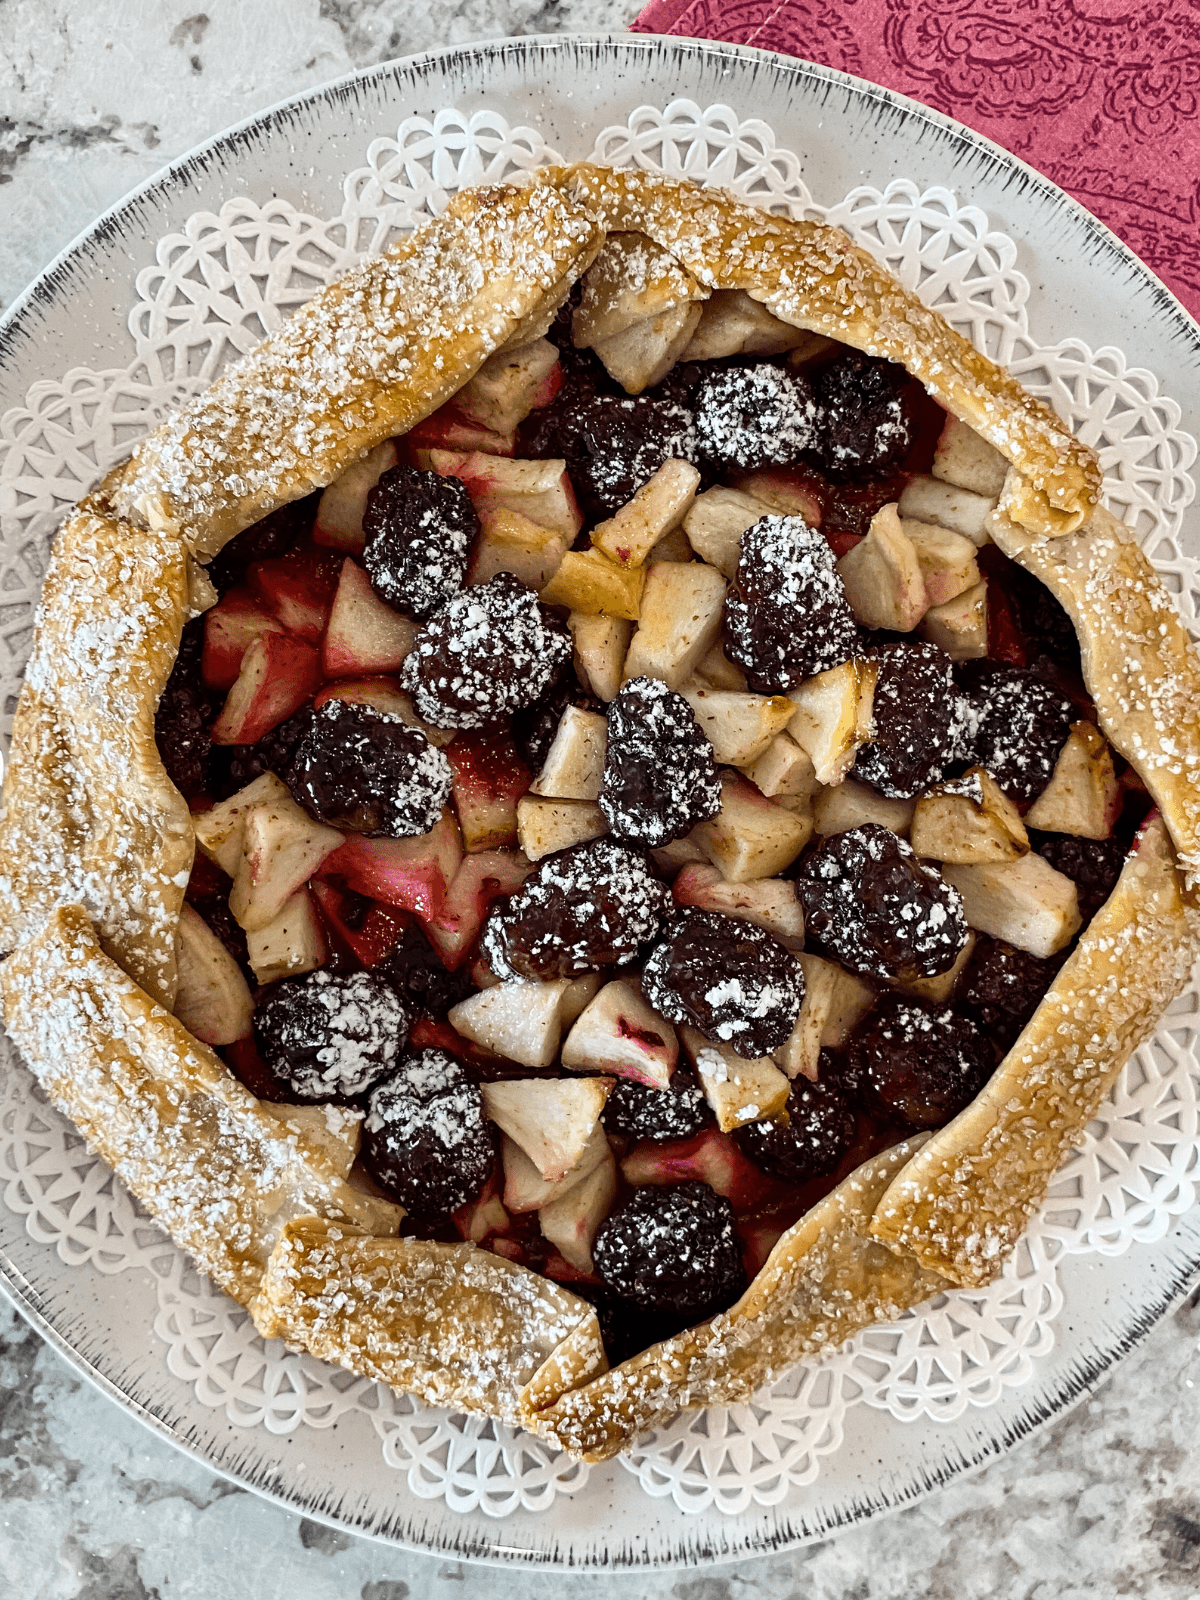 Close up view of a tart on a plate.